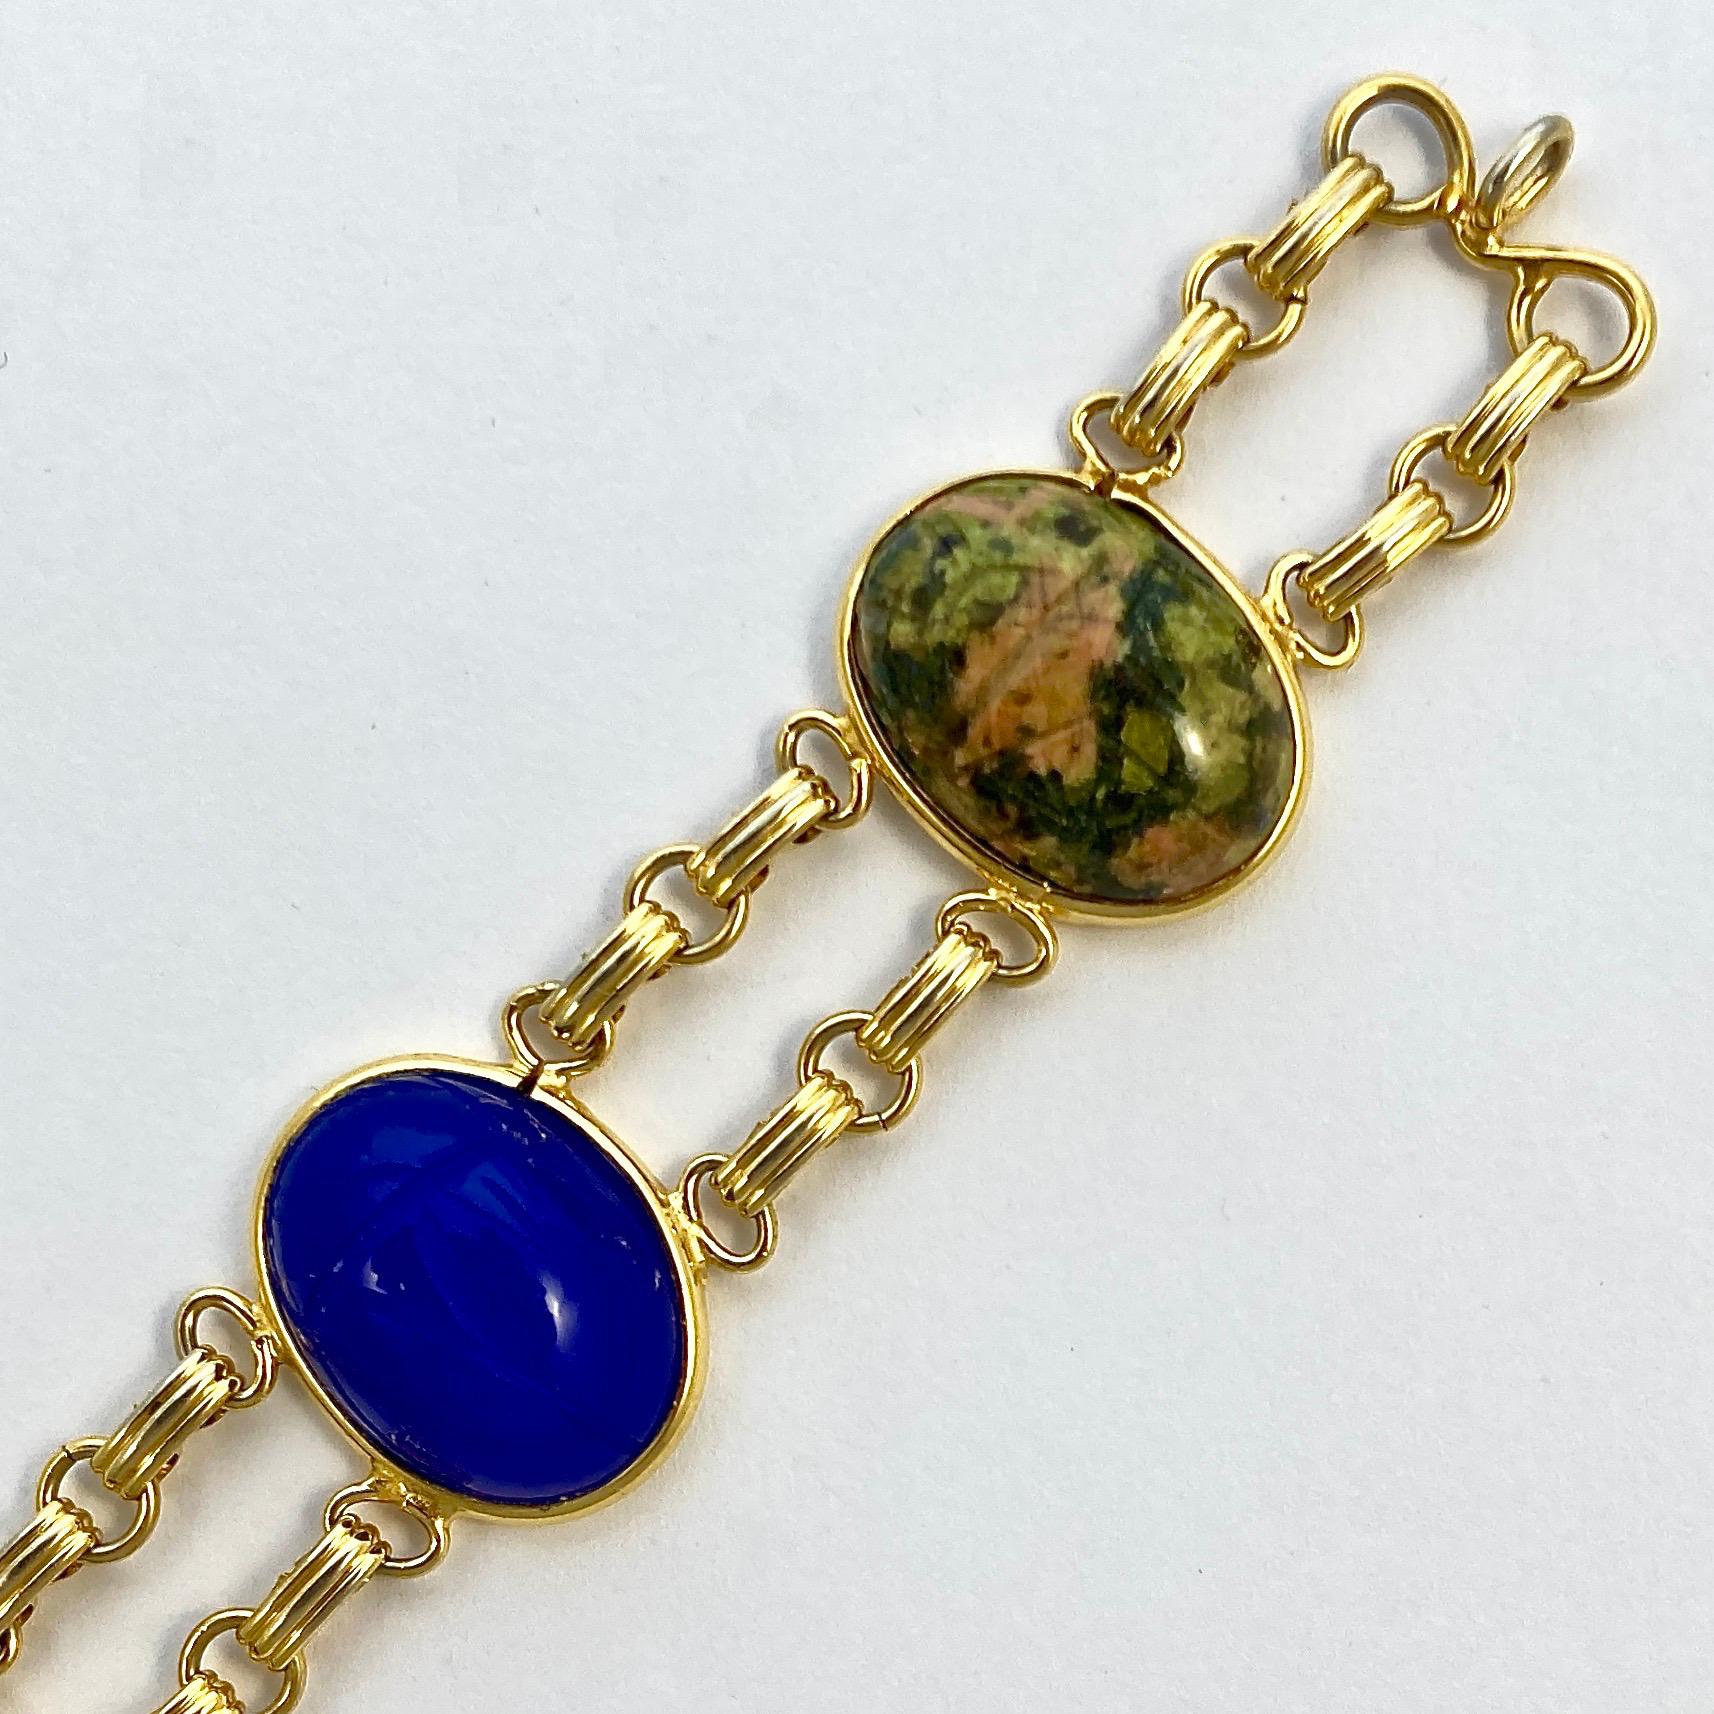 Charles Reis Company 12K gold filled vintage bracelet with a safety chain, featuring large engraved scarabs on semi precious stones, including tiger eye, blue chalcedony, and carnelian. Length 19.5cm / 7.5 inches by width 2.1cm / .8 inch. The